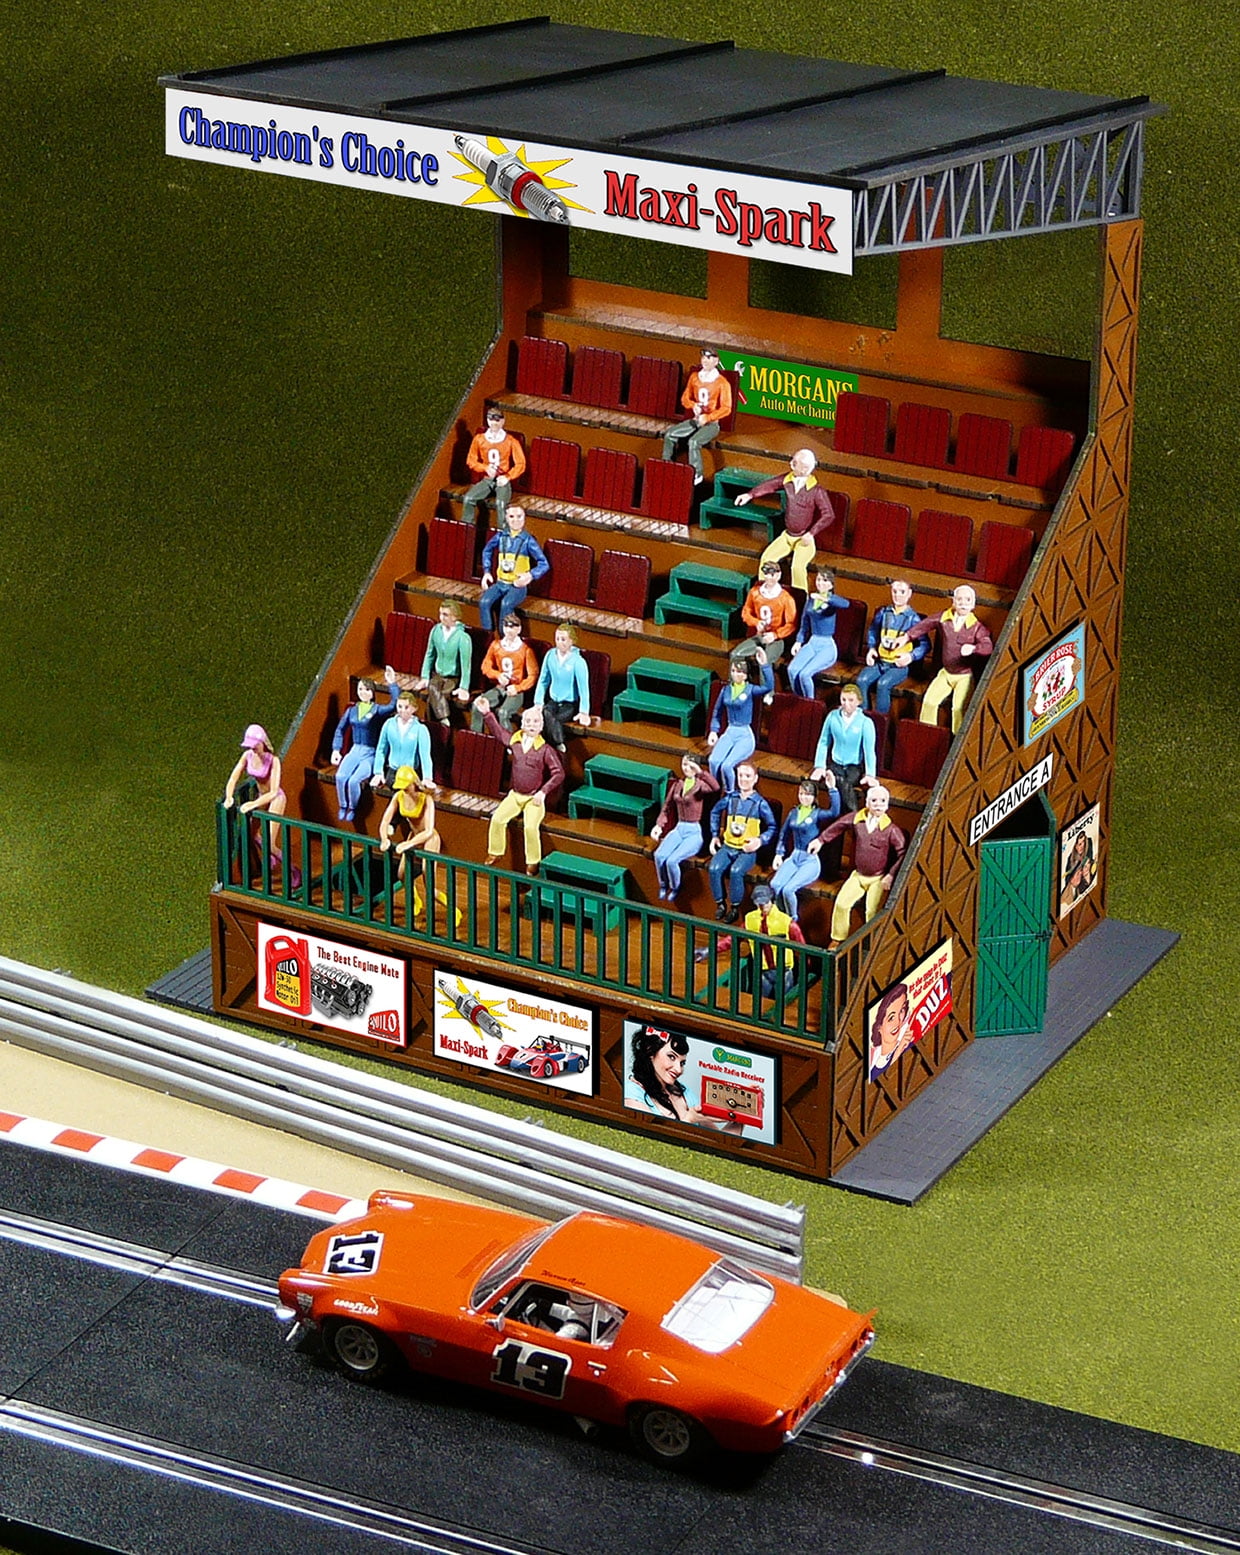 Vintage Scalextric Grandstand 1:32 Scale Kit for Scalextric/Other Layouts 